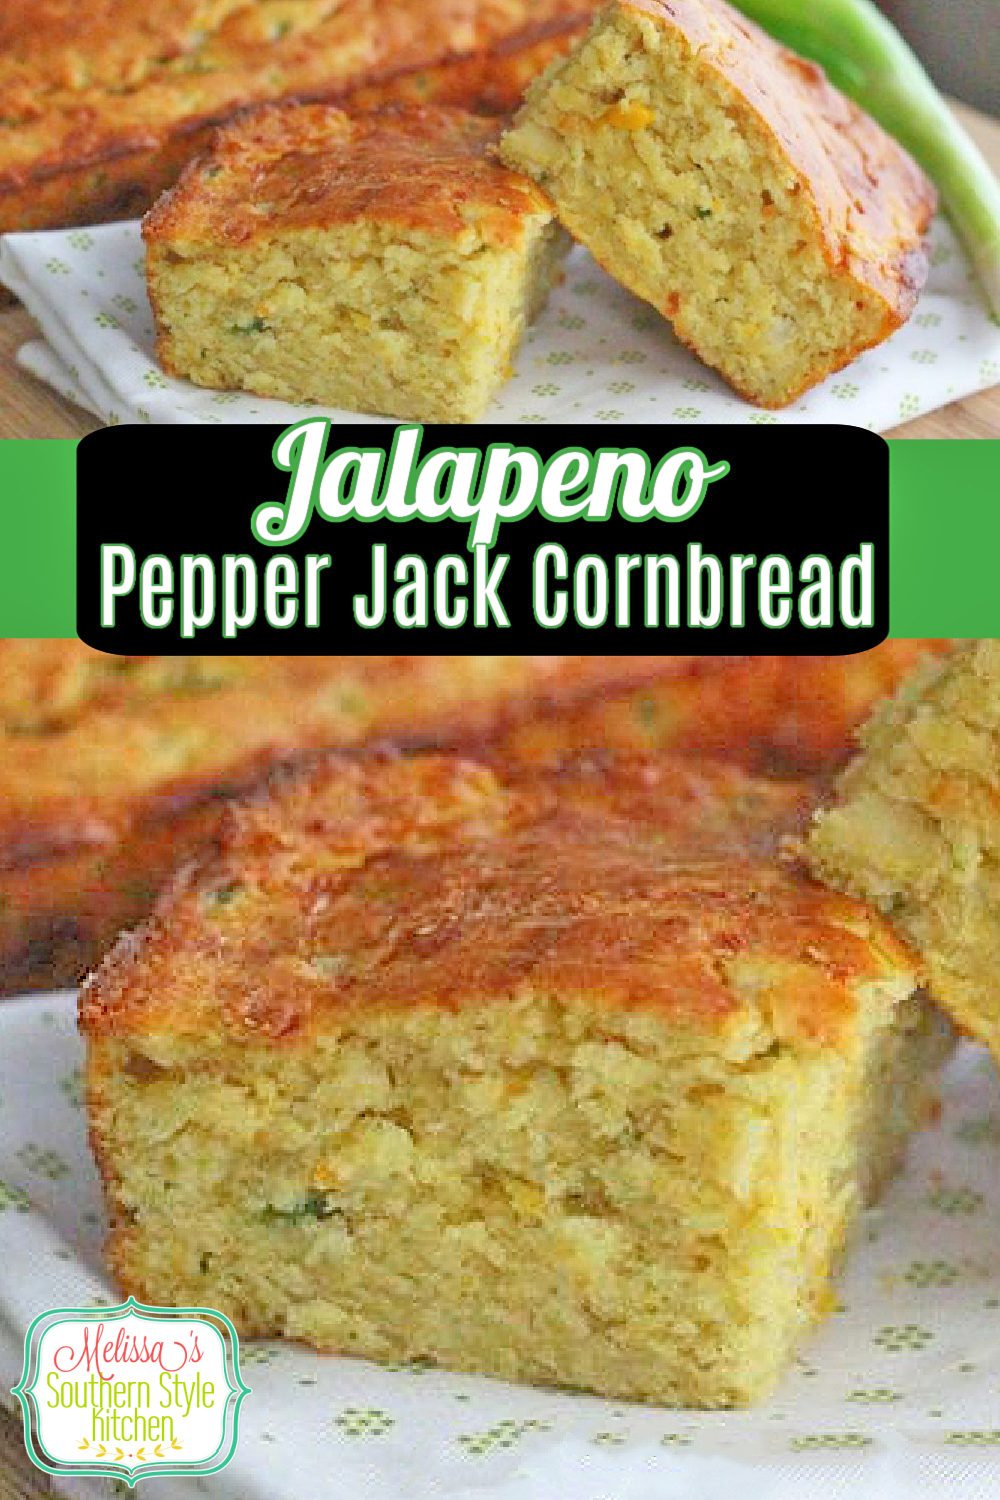 This Jalapeno Pepper-Jack Cornbread is the ideal side for a bowl of soup, beans or chili #jalapenocornbread #jalapenopepperjack #cornbreadrecipes #cornbread #southerncornbreadrecipes #sidedishes #southernfood #southernrecipes via @melissasssk